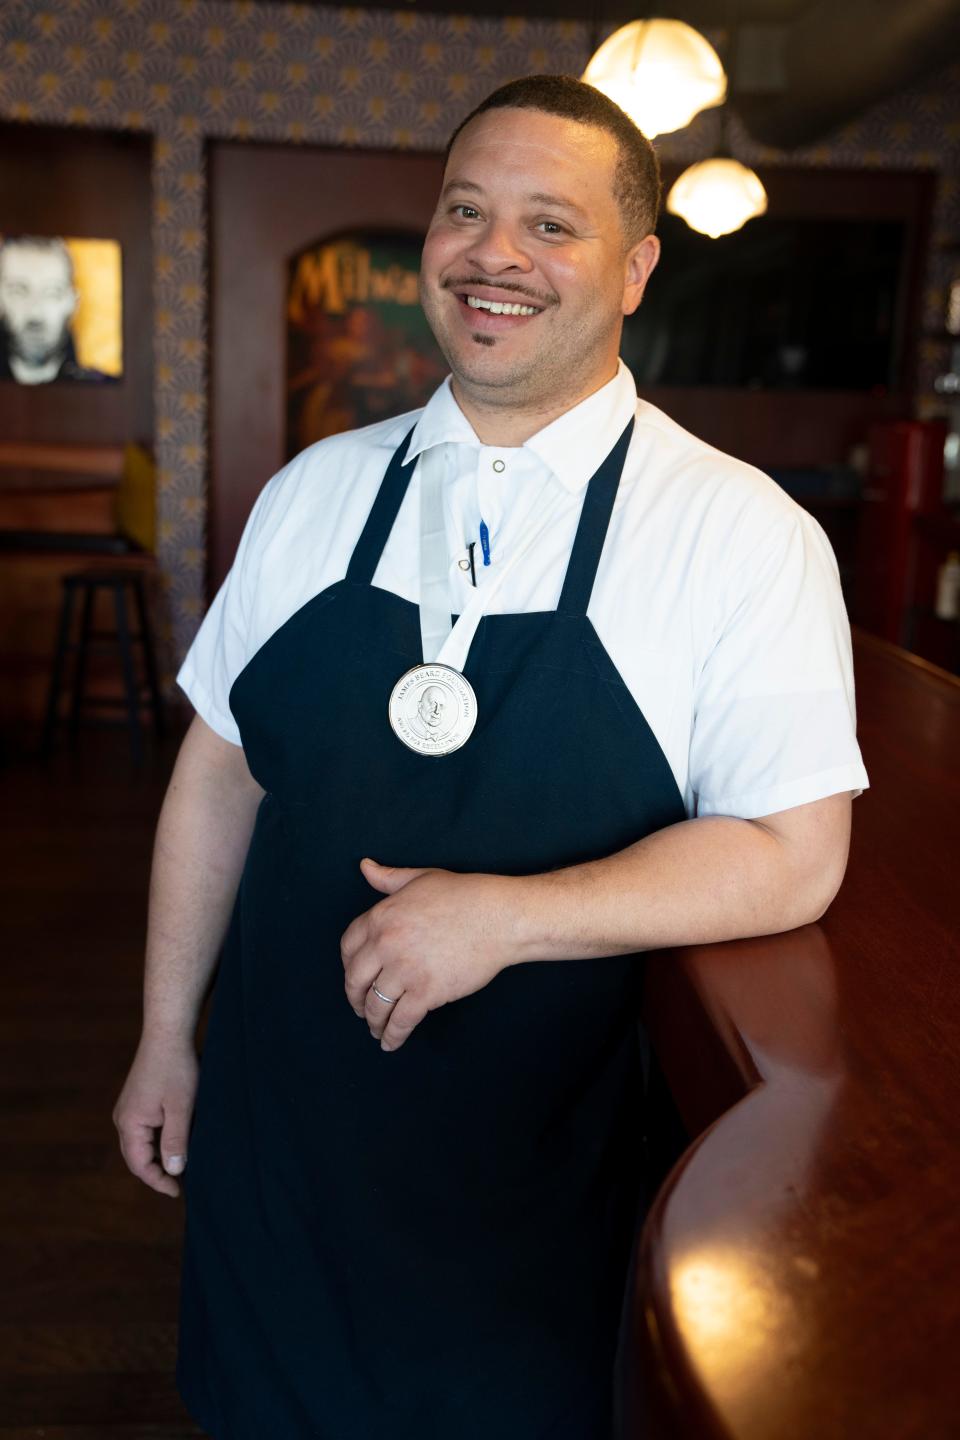 Dane Baldwin, chef/owner of The Diplomat at 815 E. Brady St. in Milwaukee, shows his medal for winning the 2022 James Beard best chef Midwest honor. Baldwin is shown back at his restaurant on June 15.